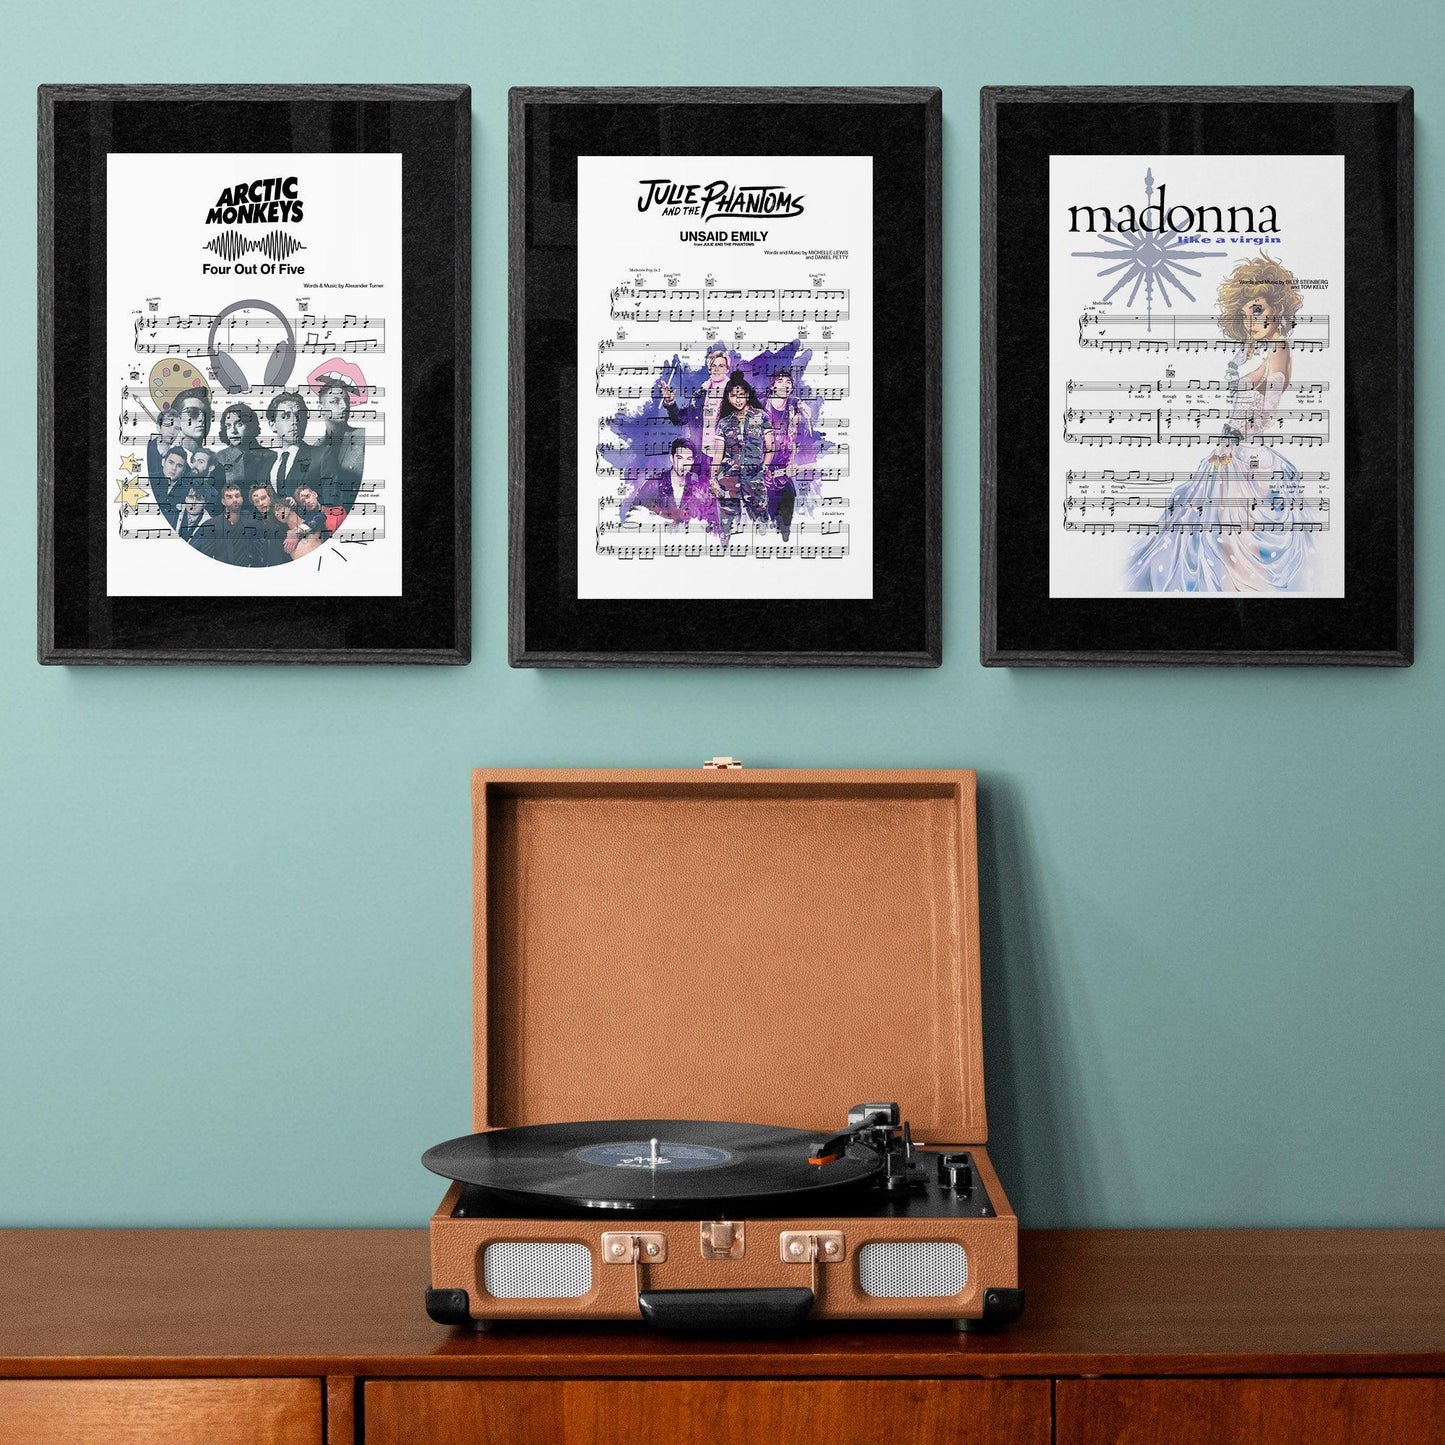 Julie and the Phantoms - Unsaid Emily Song Print | Song Music Sheet Notes Print  Everyone has a favorite song especially Madonna Don't Cry For Me Argentina Print, and now you can show the score as printed staff. The personal favorite song sheet print shows the song chosen as the score. 